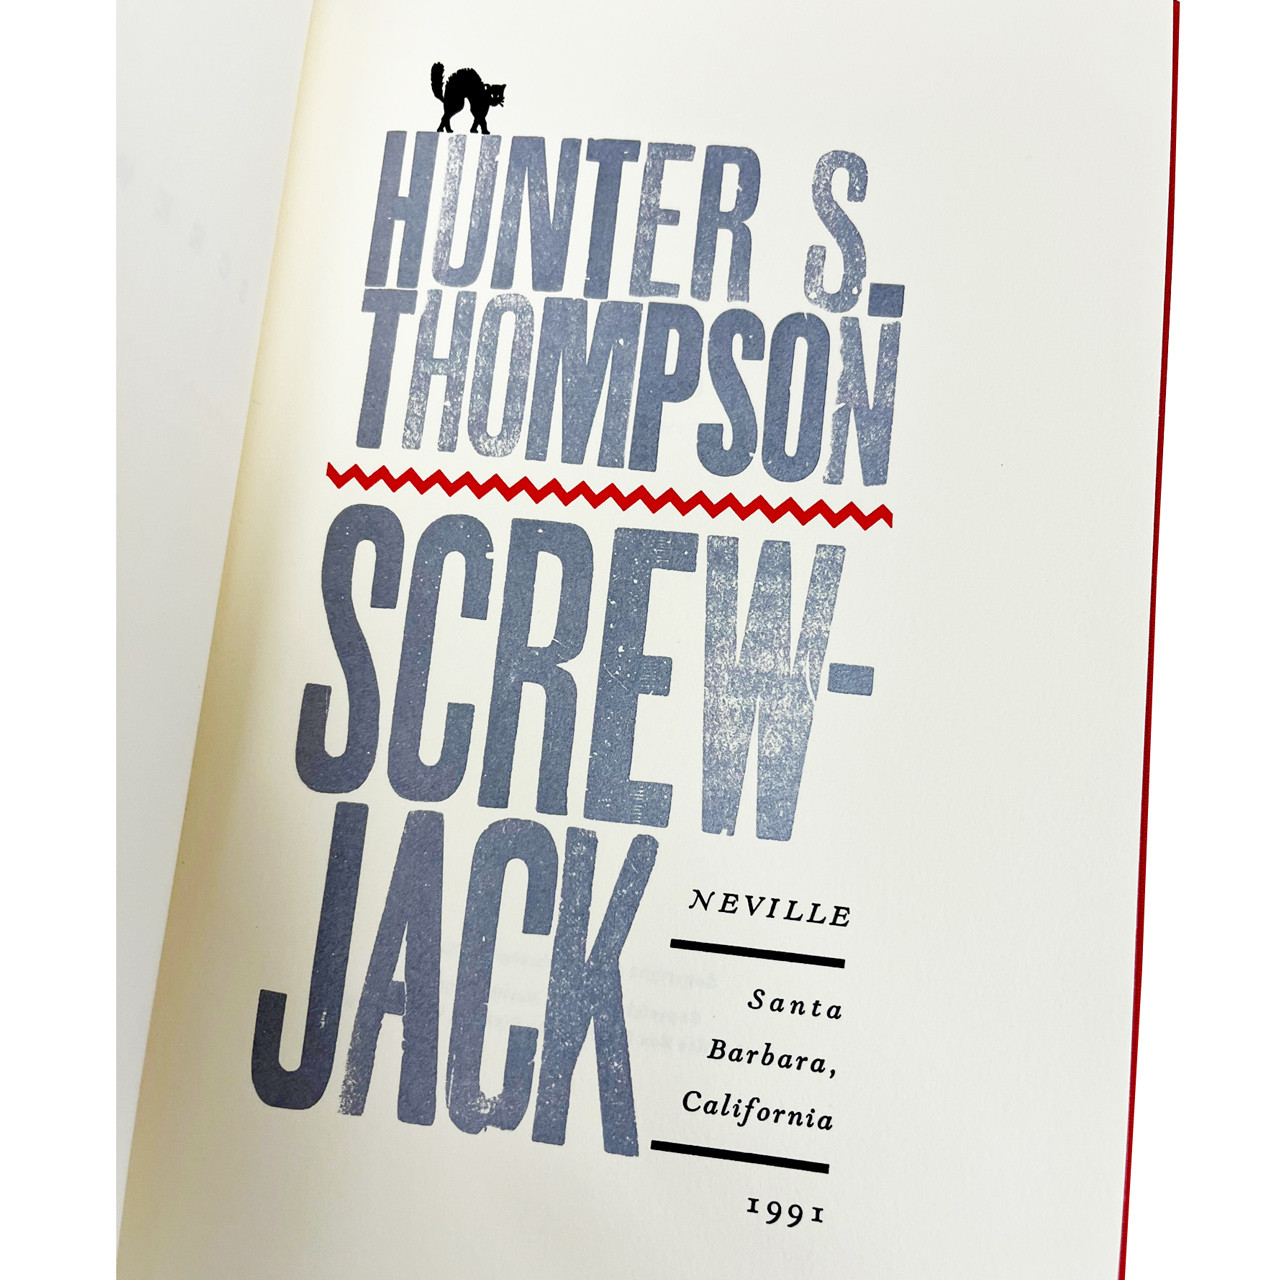 Hunter S. Thompson "Screwjack" Signed Limited Edition No. 157 of 300 [Very Fine]